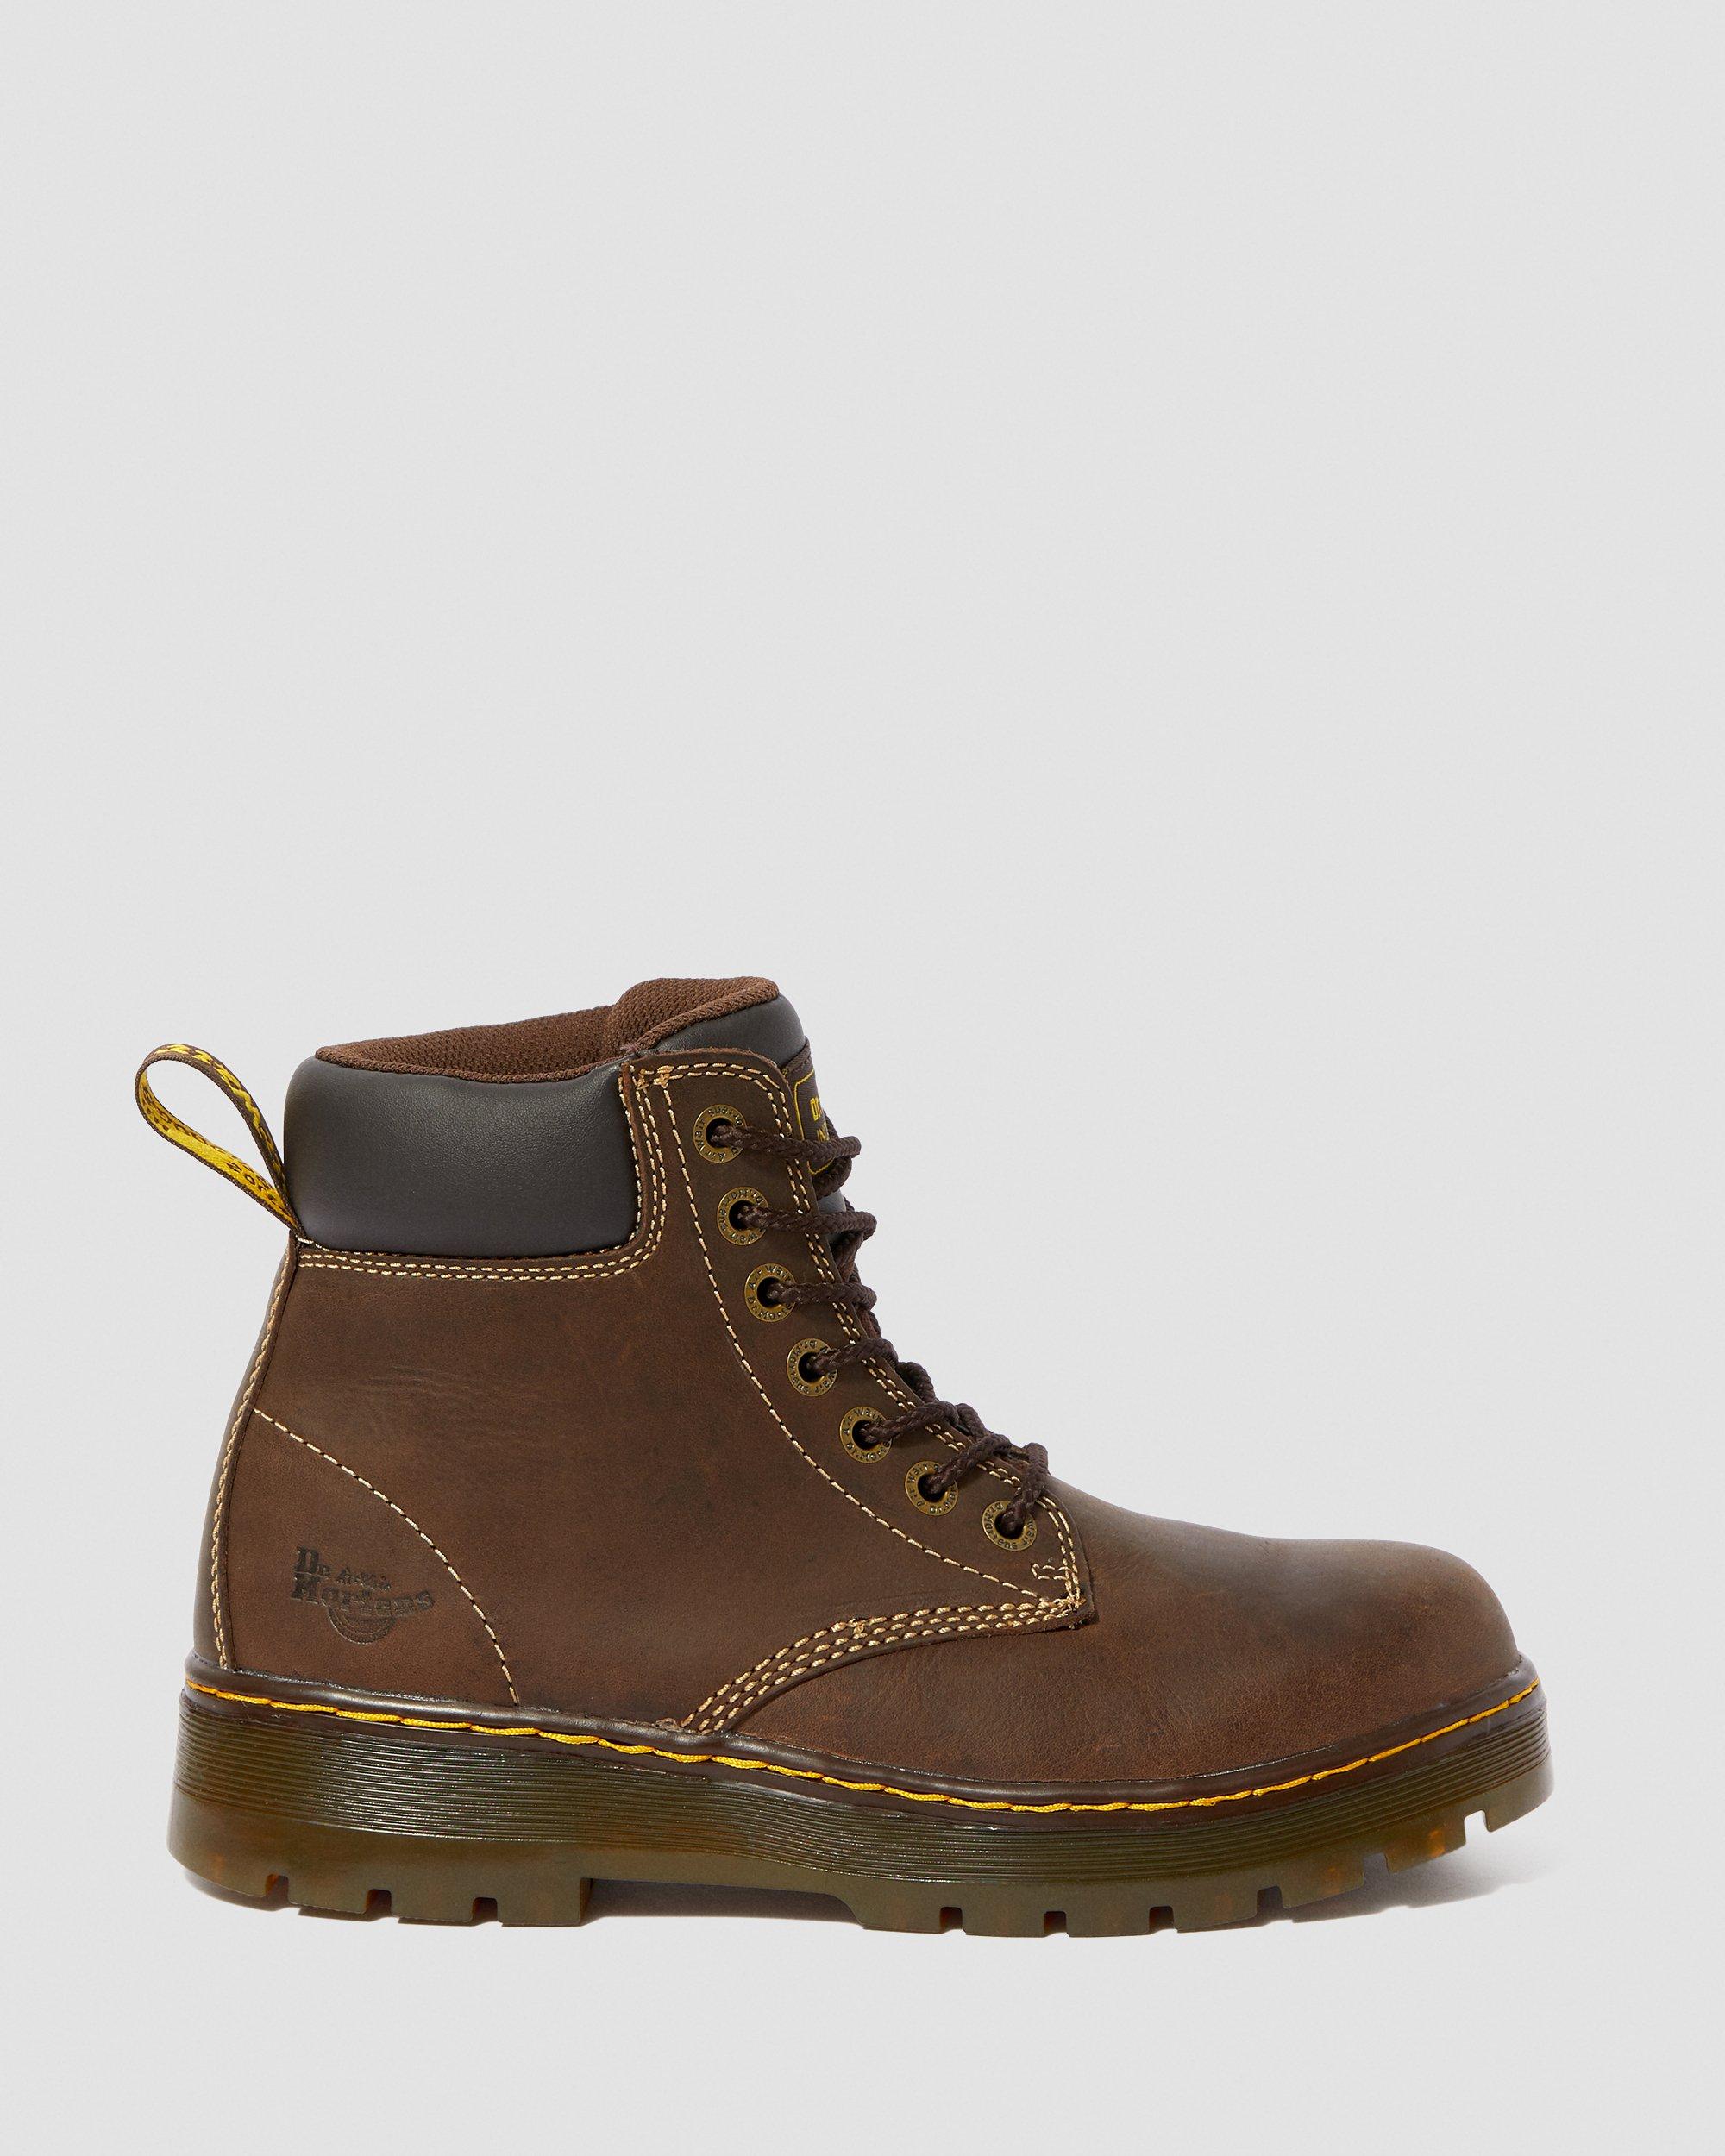 Winch Wyoming Work Boots | Dr. Martens